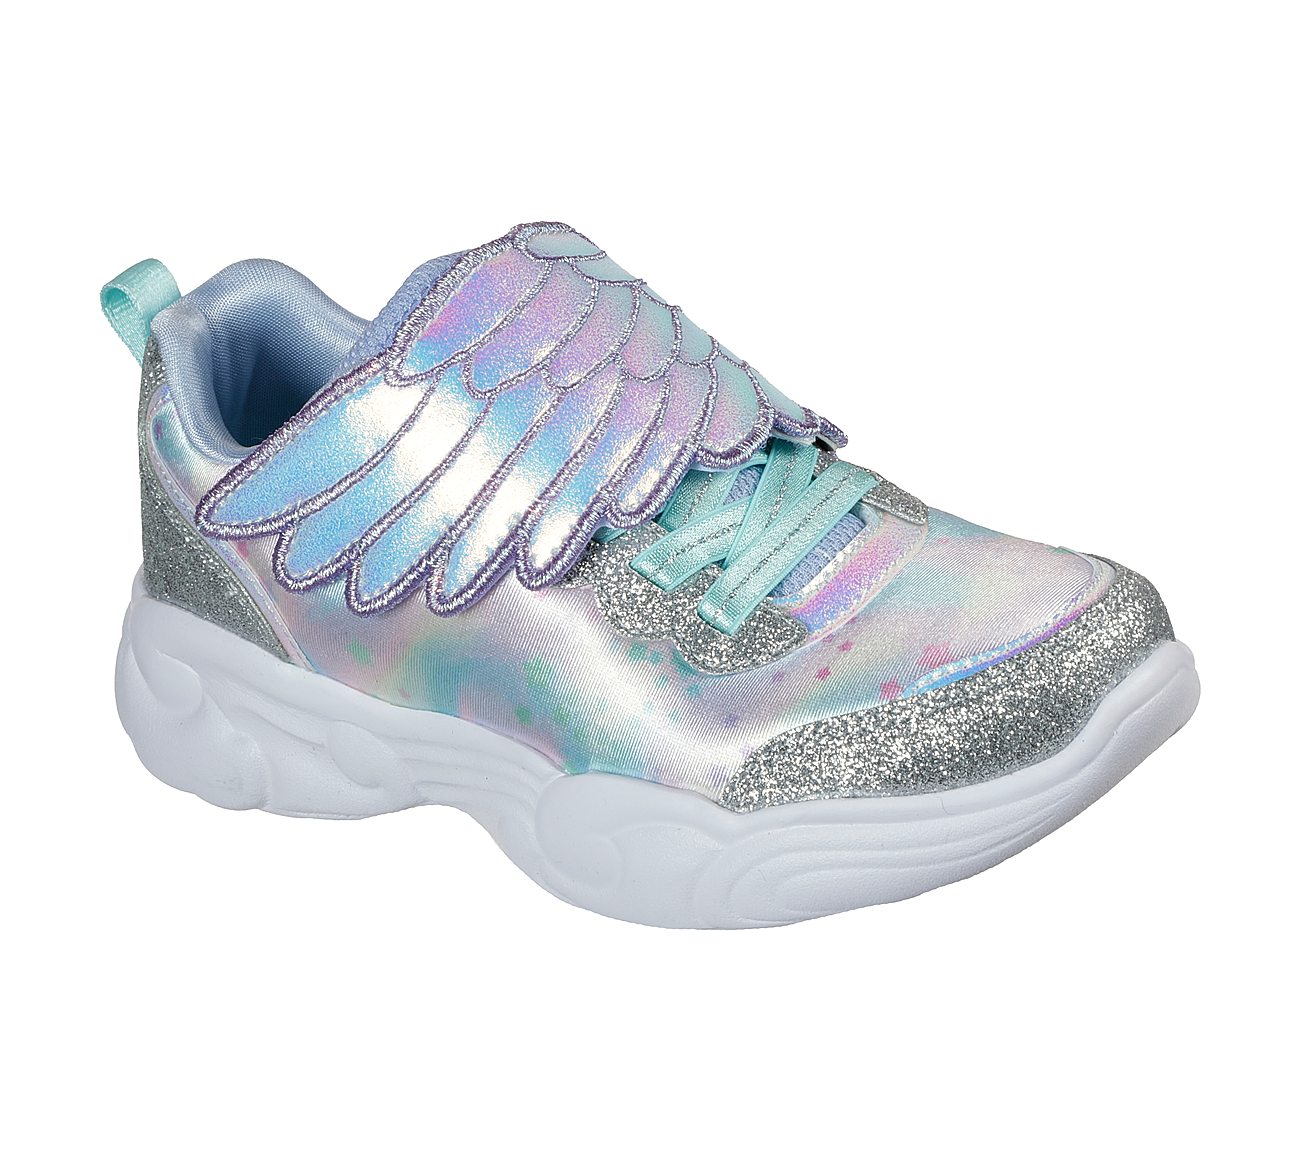 UNICORN STORM - WING DAZZLE, SILVER/MULTI Footwear Lateral View